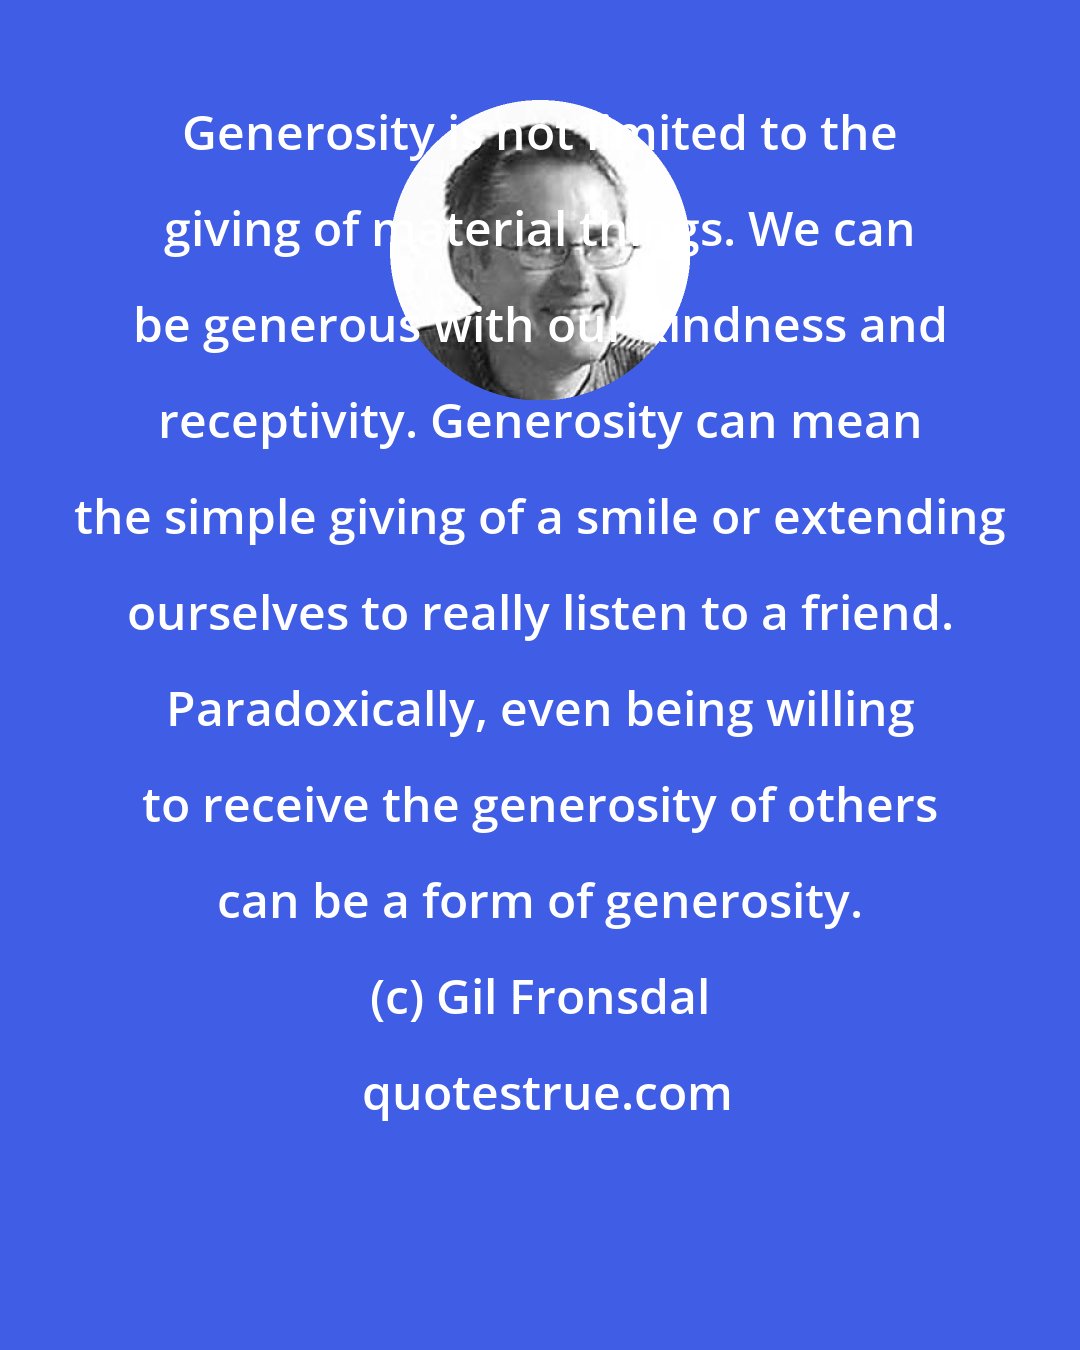 Gil Fronsdal: Generosity is not limited to the giving of material things. We can be generous with our kindness and receptivity. Generosity can mean the simple giving of a smile or extending ourselves to really listen to a friend. Paradoxically, even being willing to receive the generosity of others can be a form of generosity.